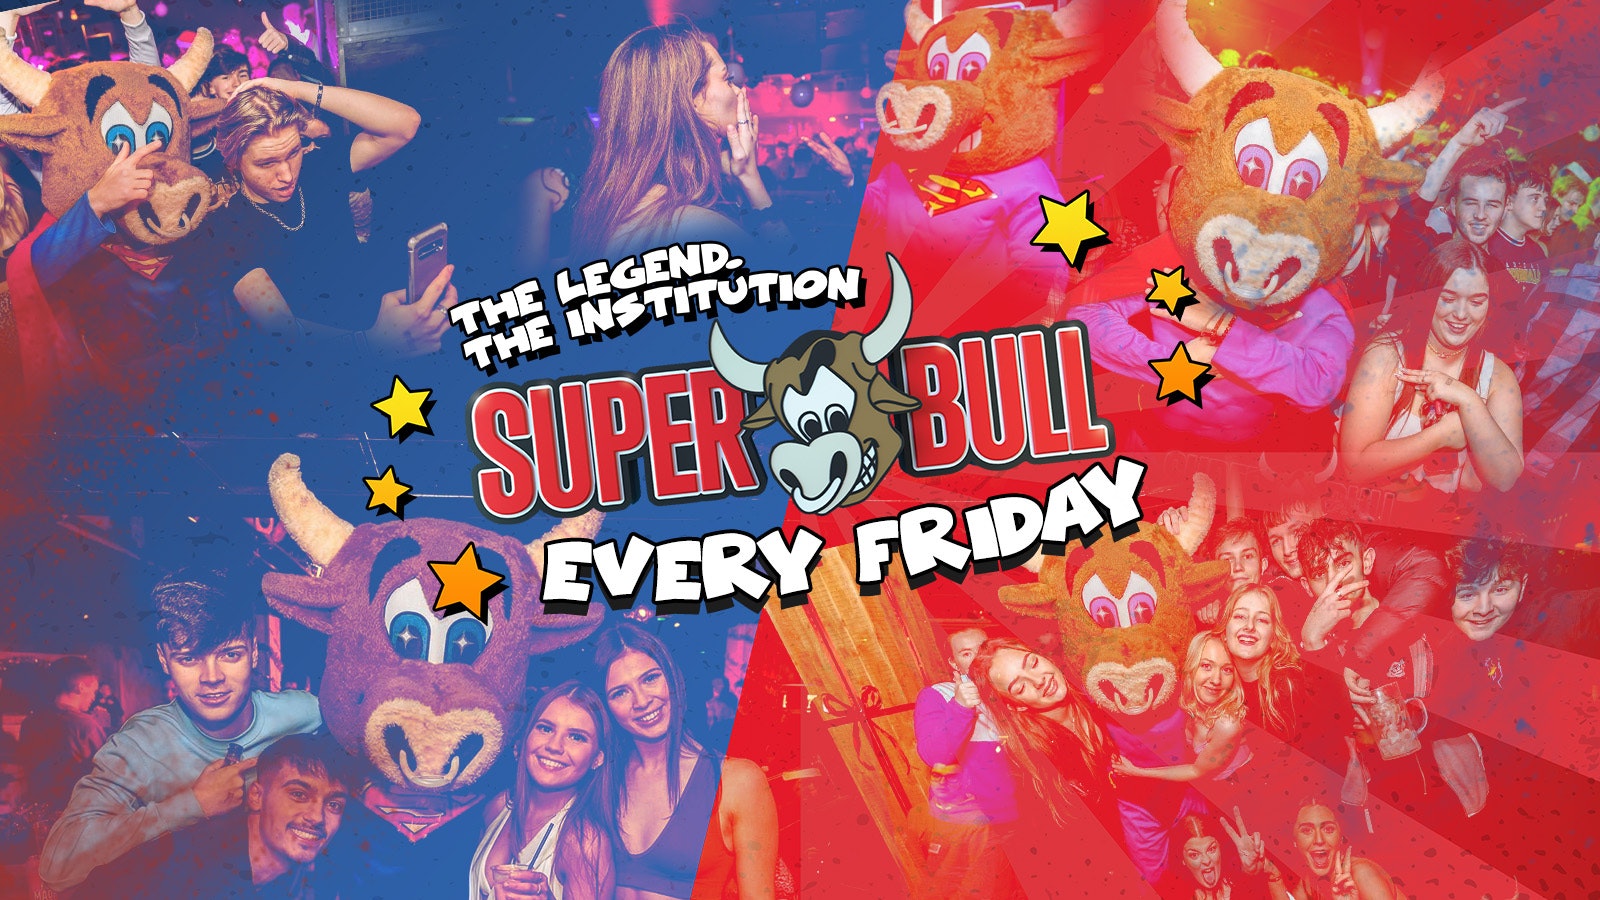 The Superbull – The Legend. The Institution – Fri 17th May